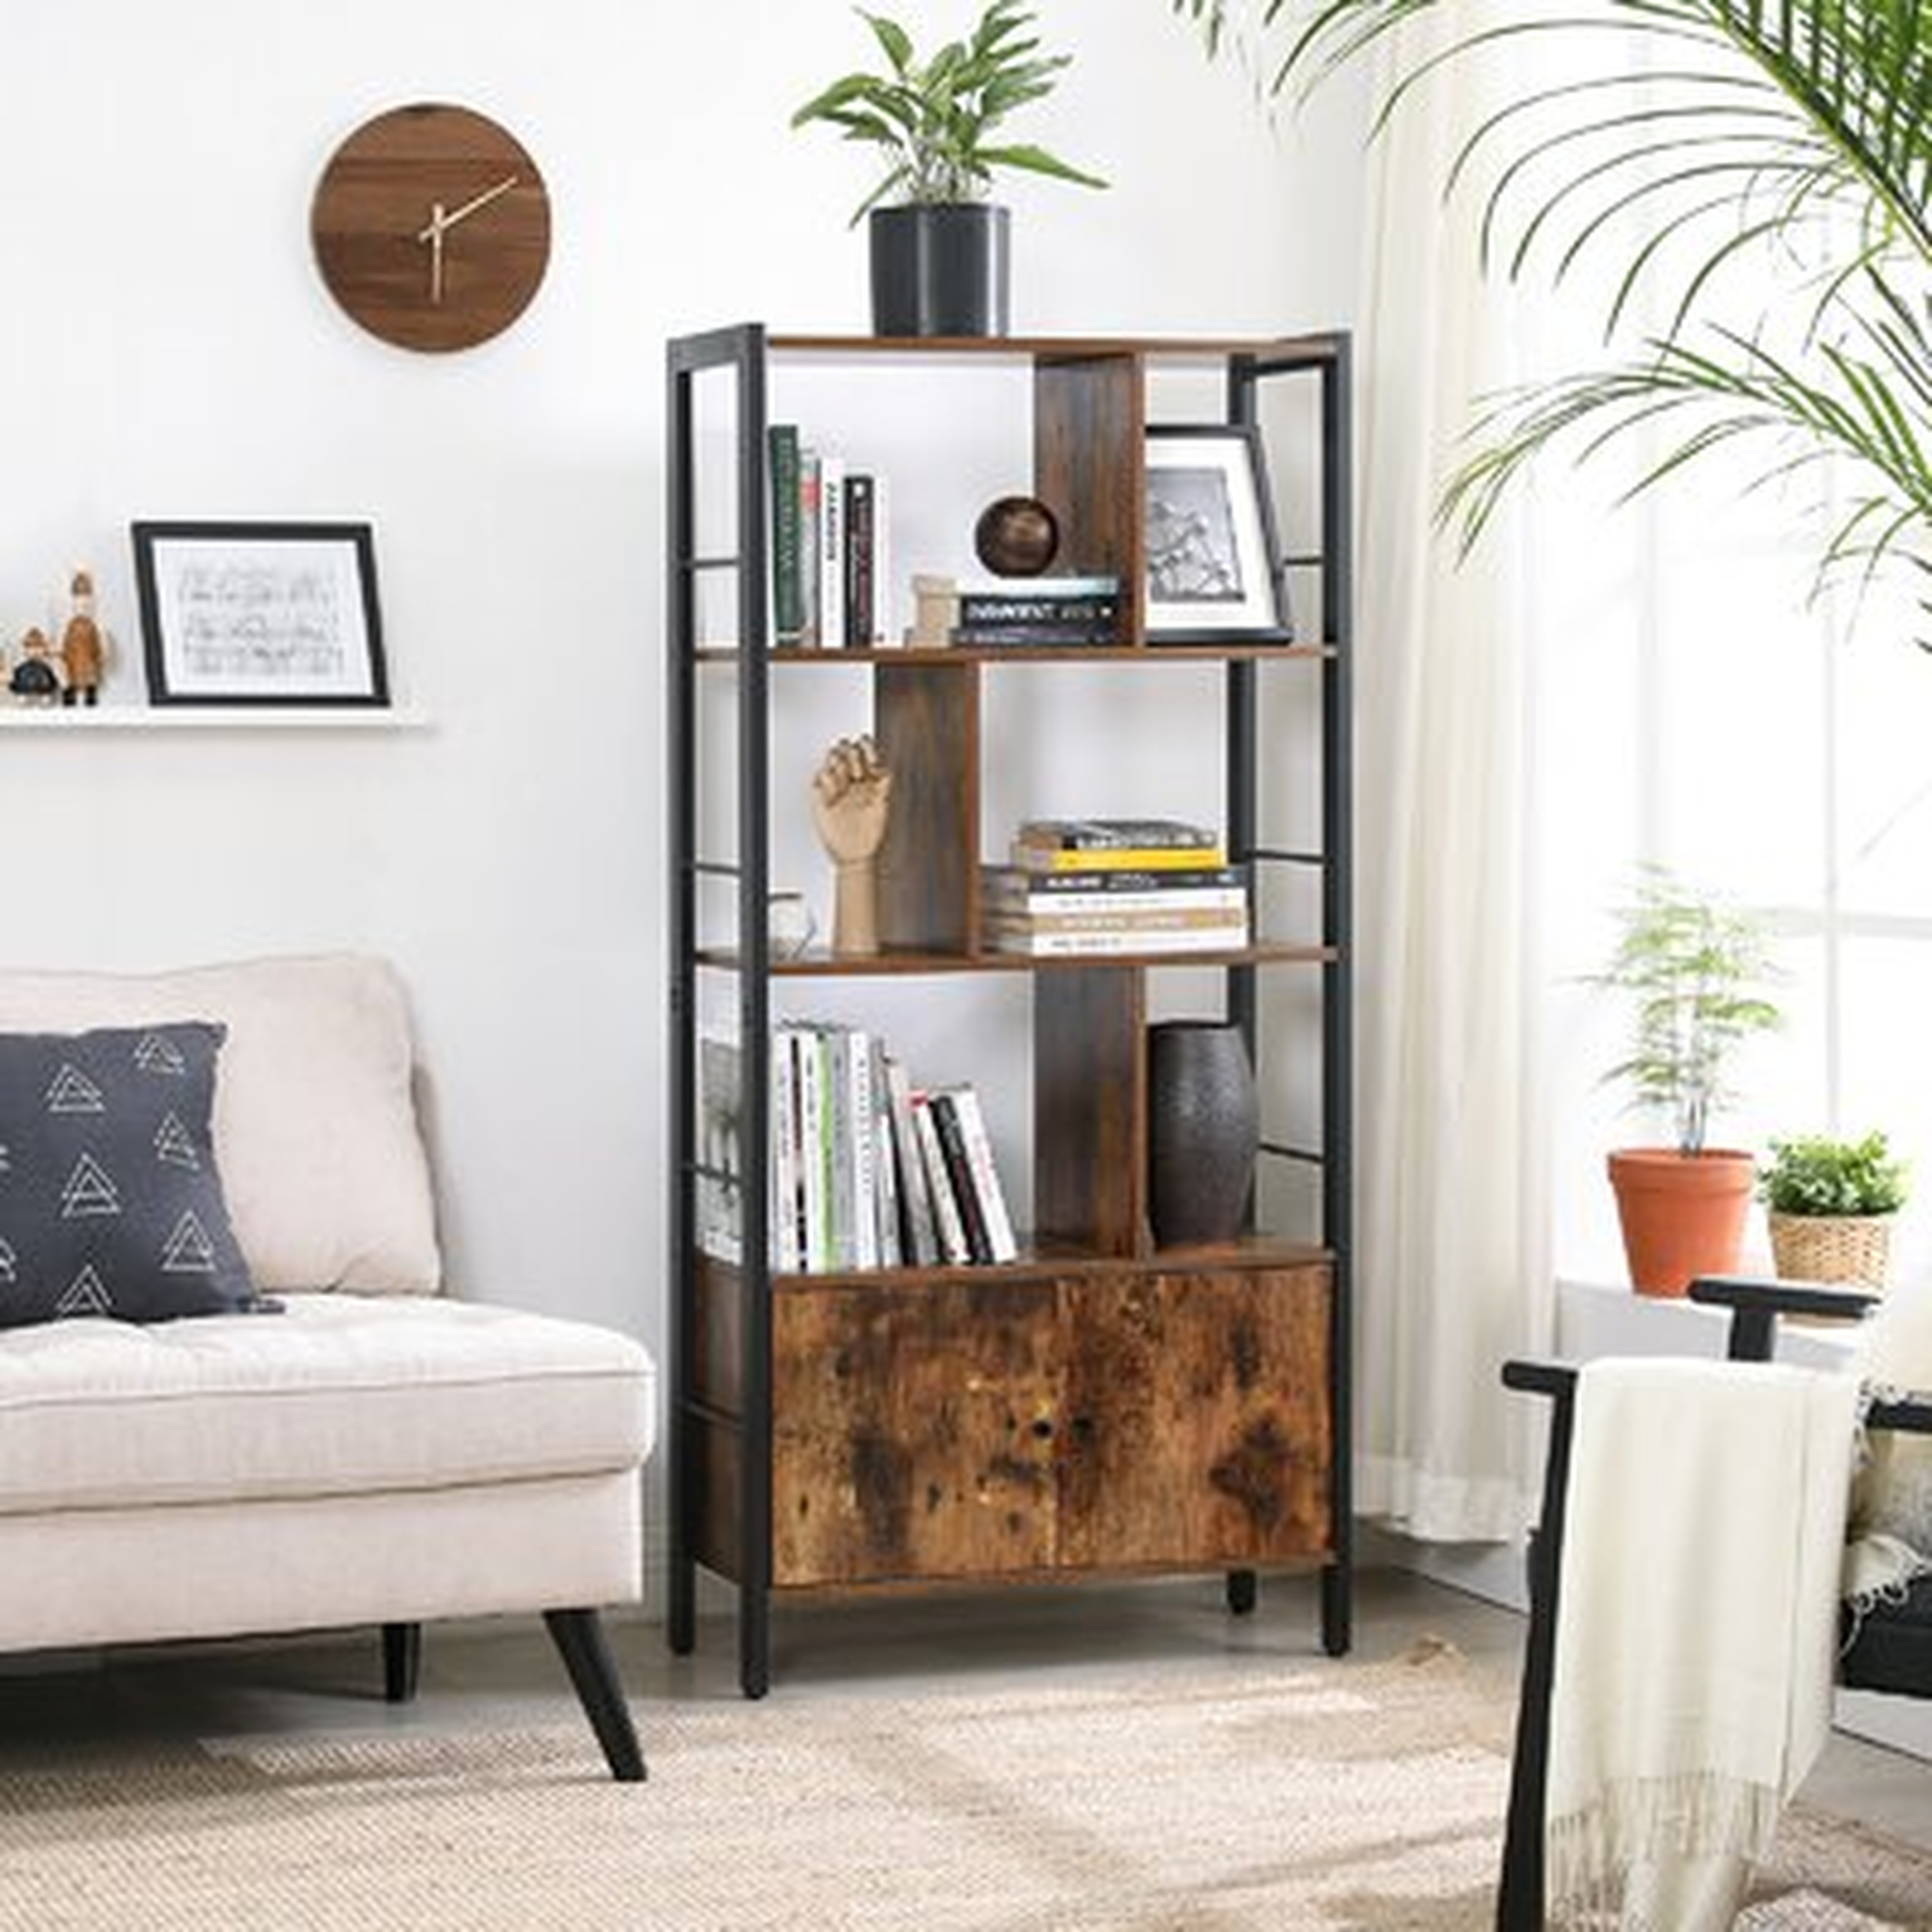 17 Stories Bookshelf, Storage Shelf, Large Bookcase With 4 Shelves, Stable Steel Structure, Industrial Style, Rustic Brown And Black - Wayfair